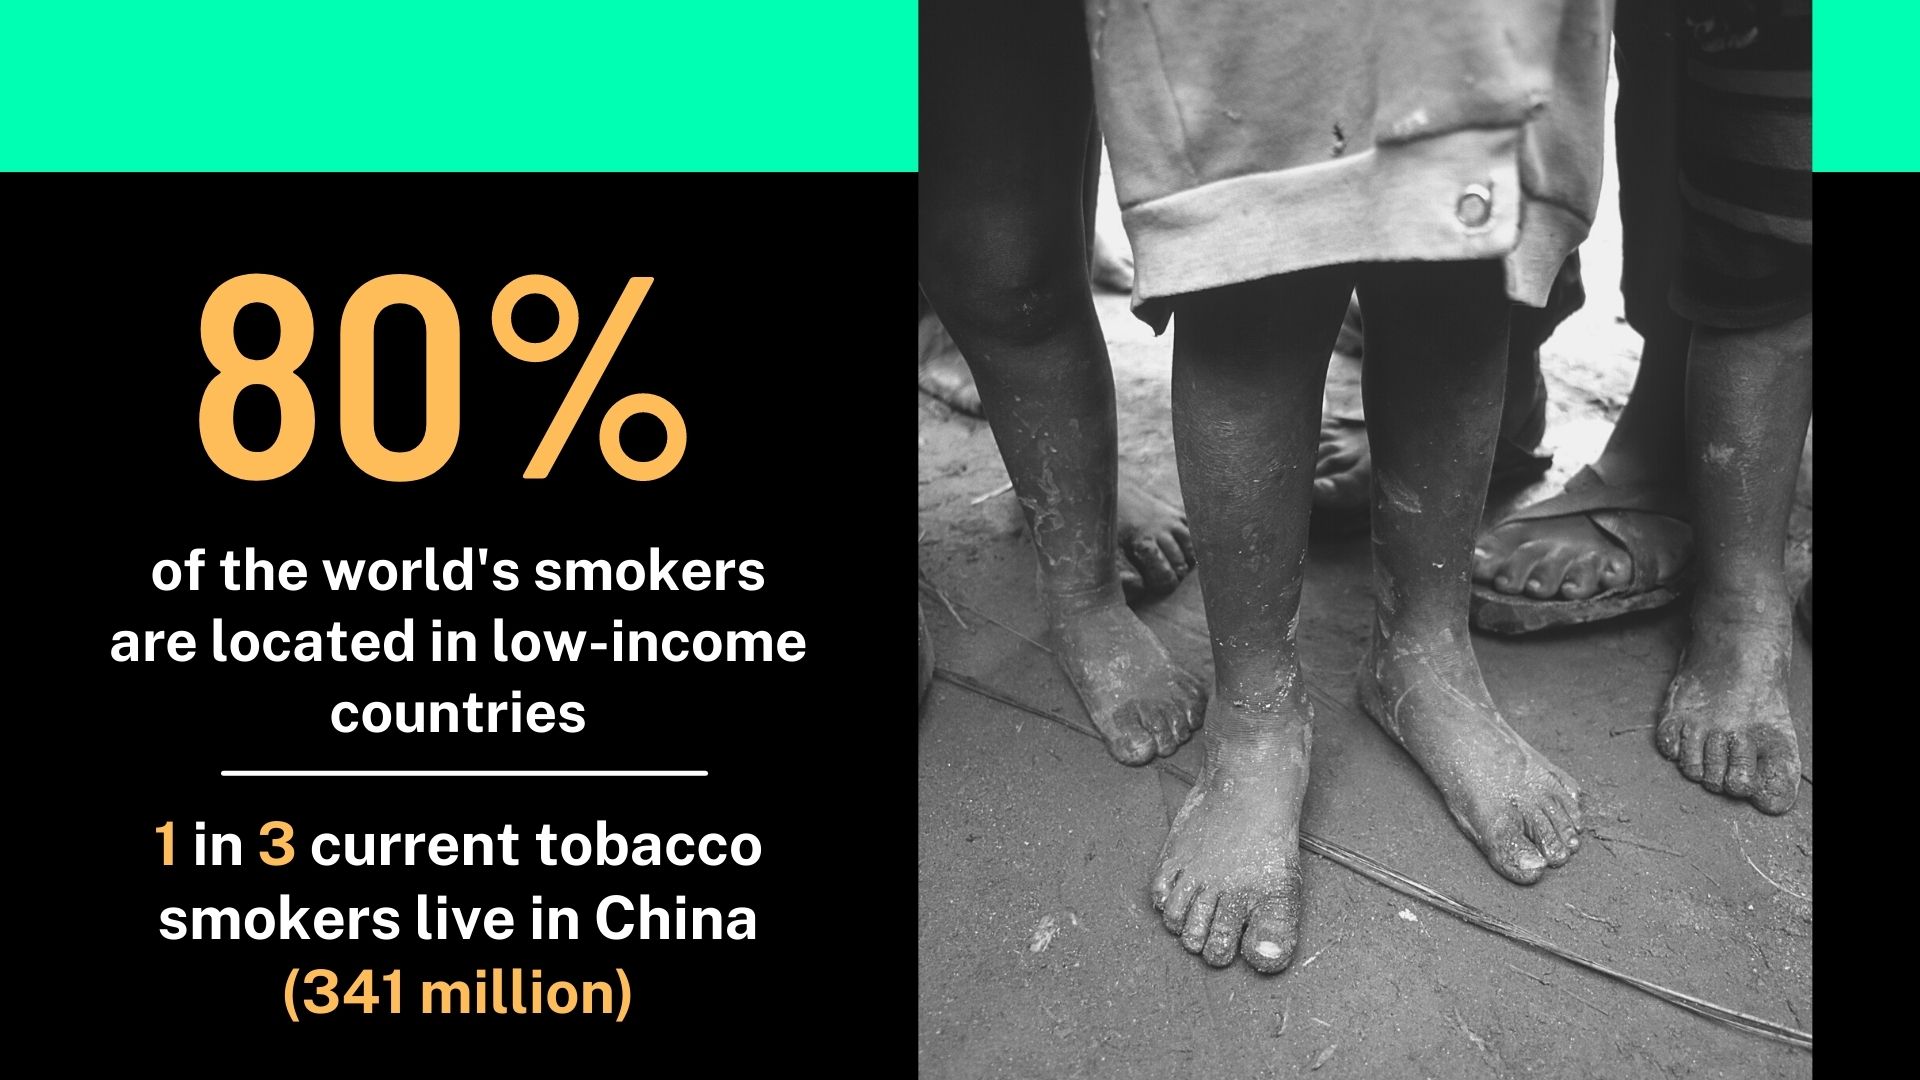 World No Tobacco Day: 780 million people want to quit smoking but only 30% have access to tools to kick the habit